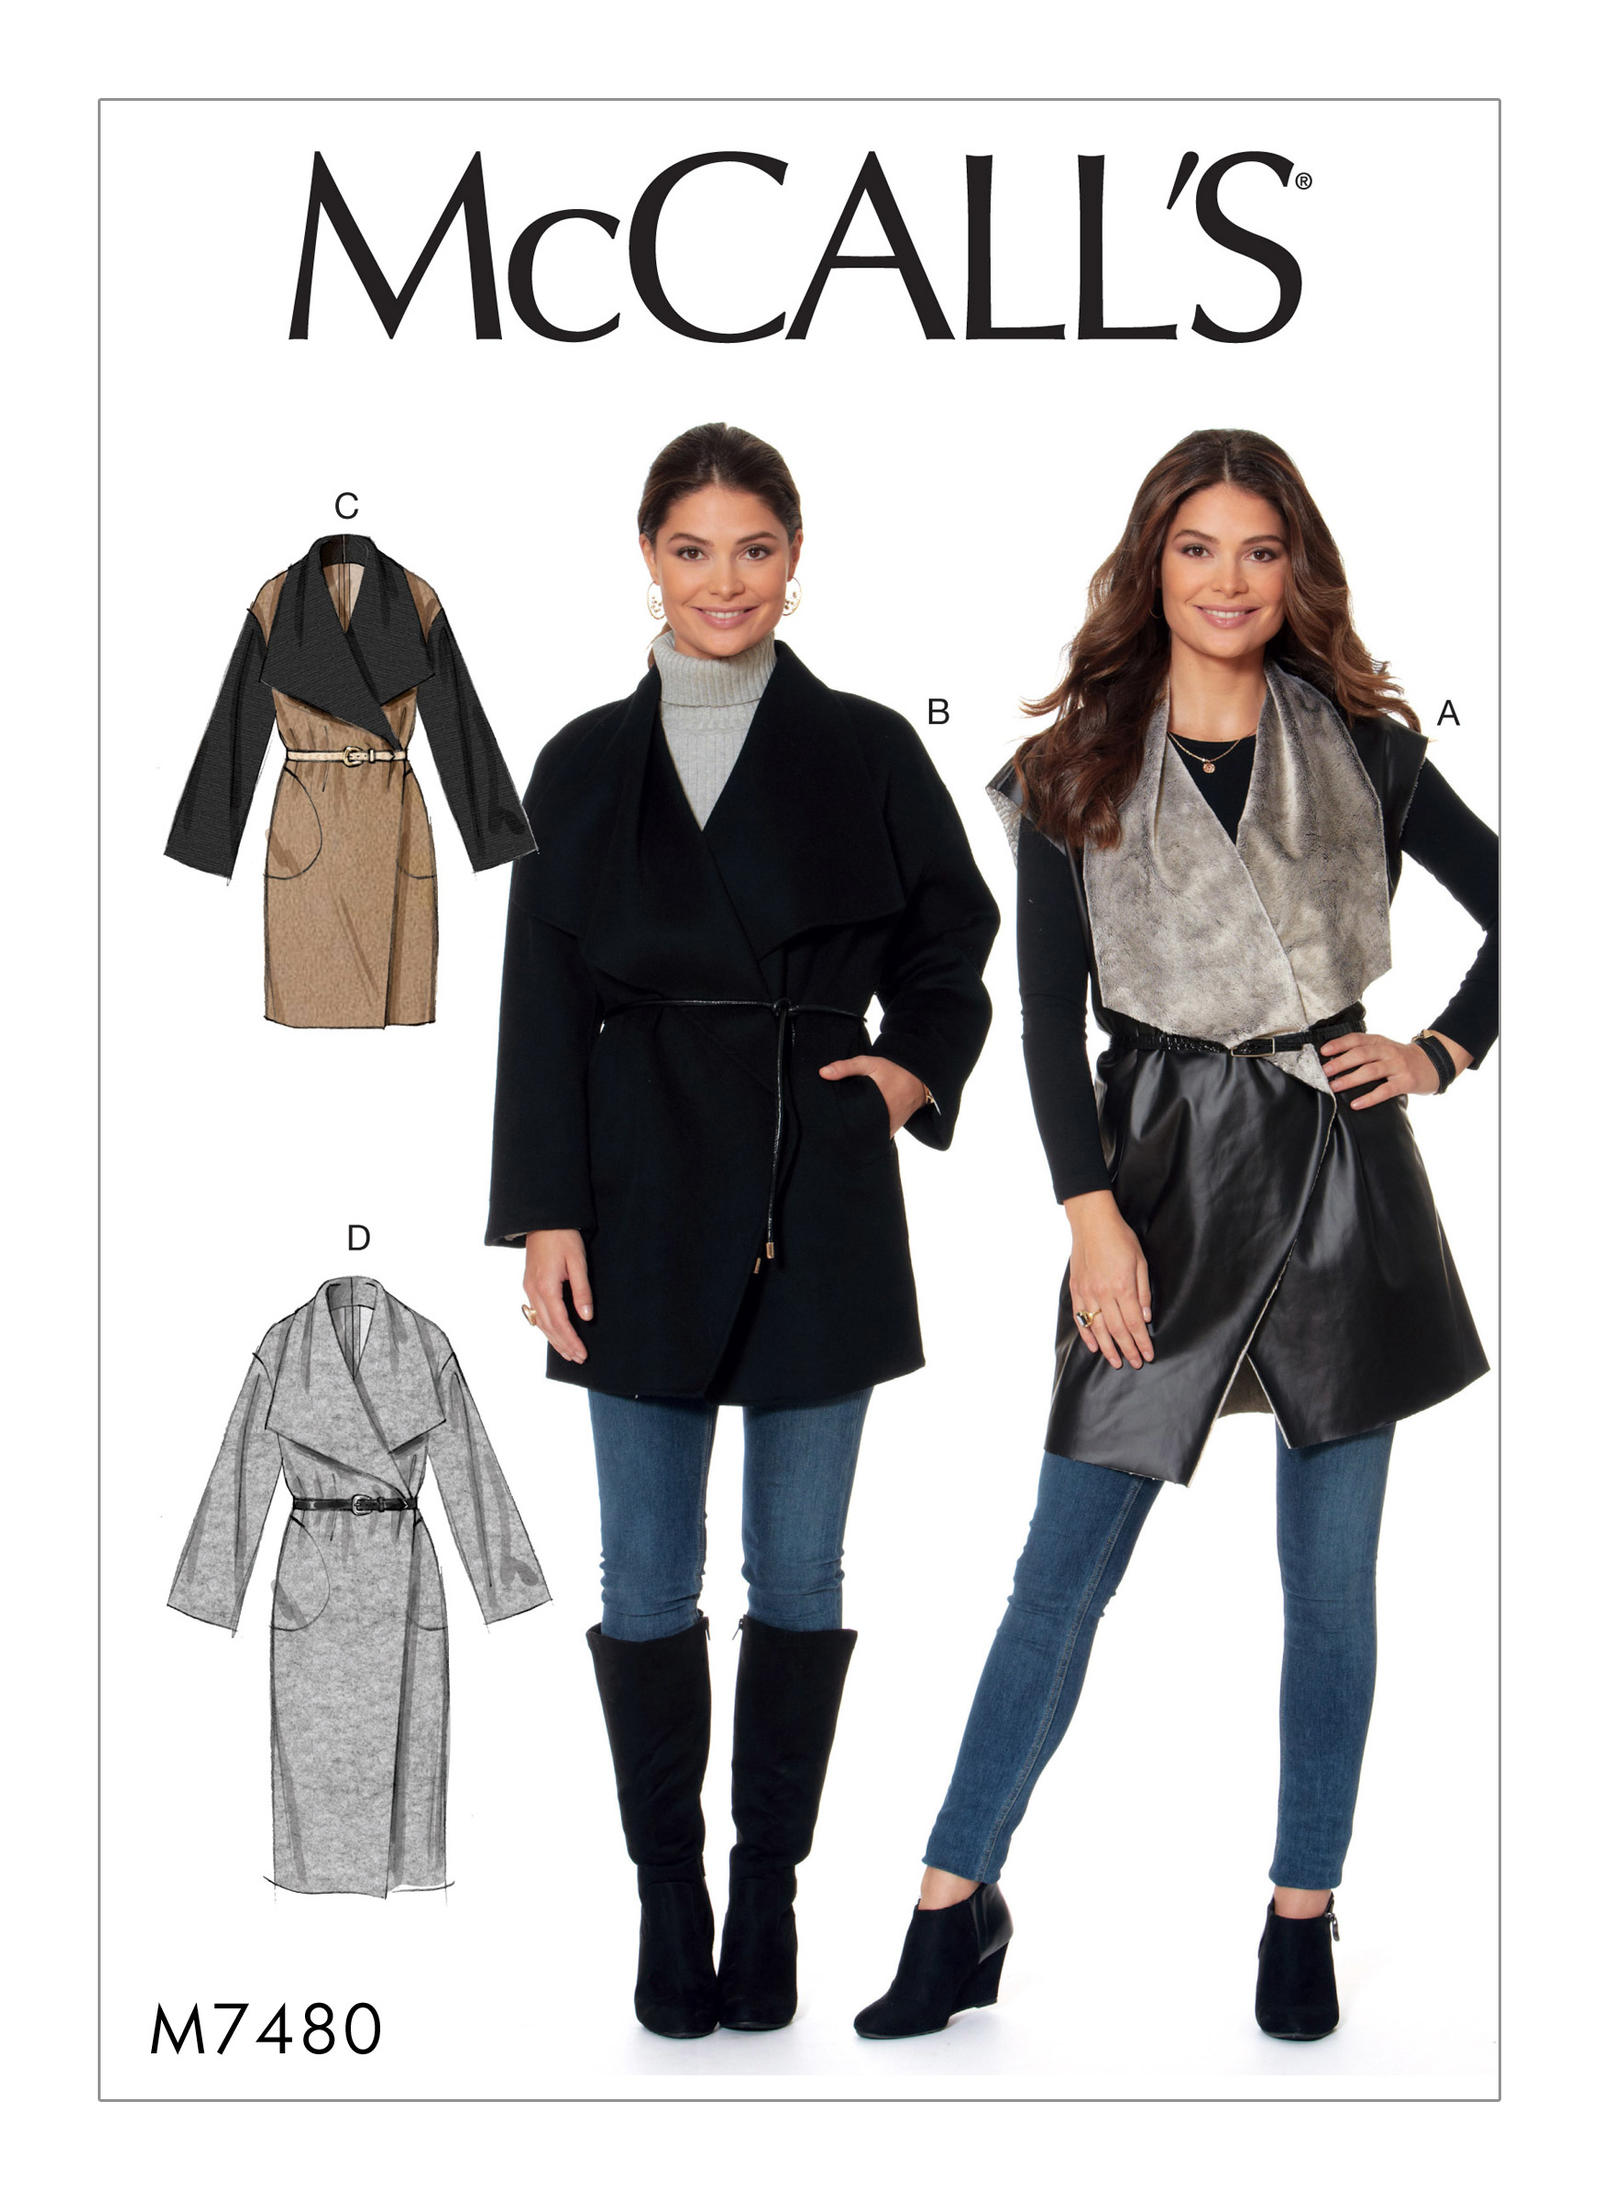 McCall's 7480 Misses' Shawl Collar, Wrap Vest and Coats